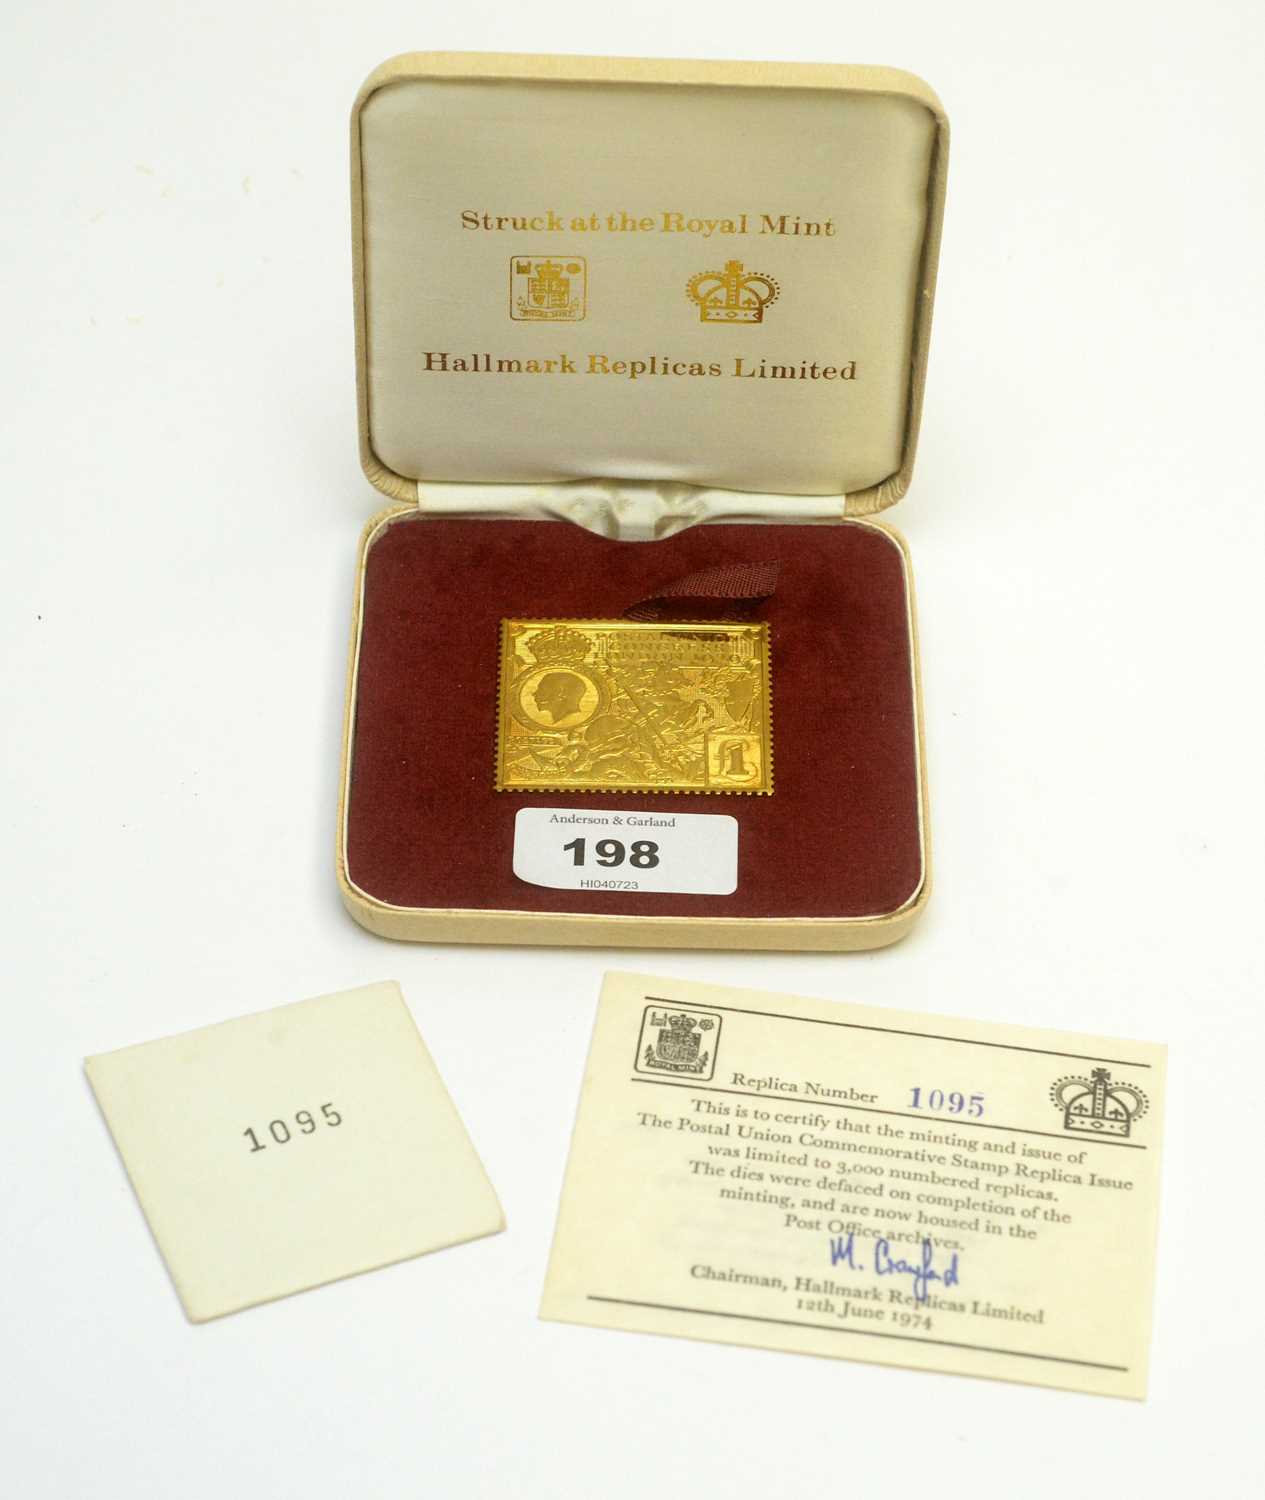 Lot 198 - A 22ct yellow gold medallion replica of the Postal Union Congress London 1919 £1 stamp